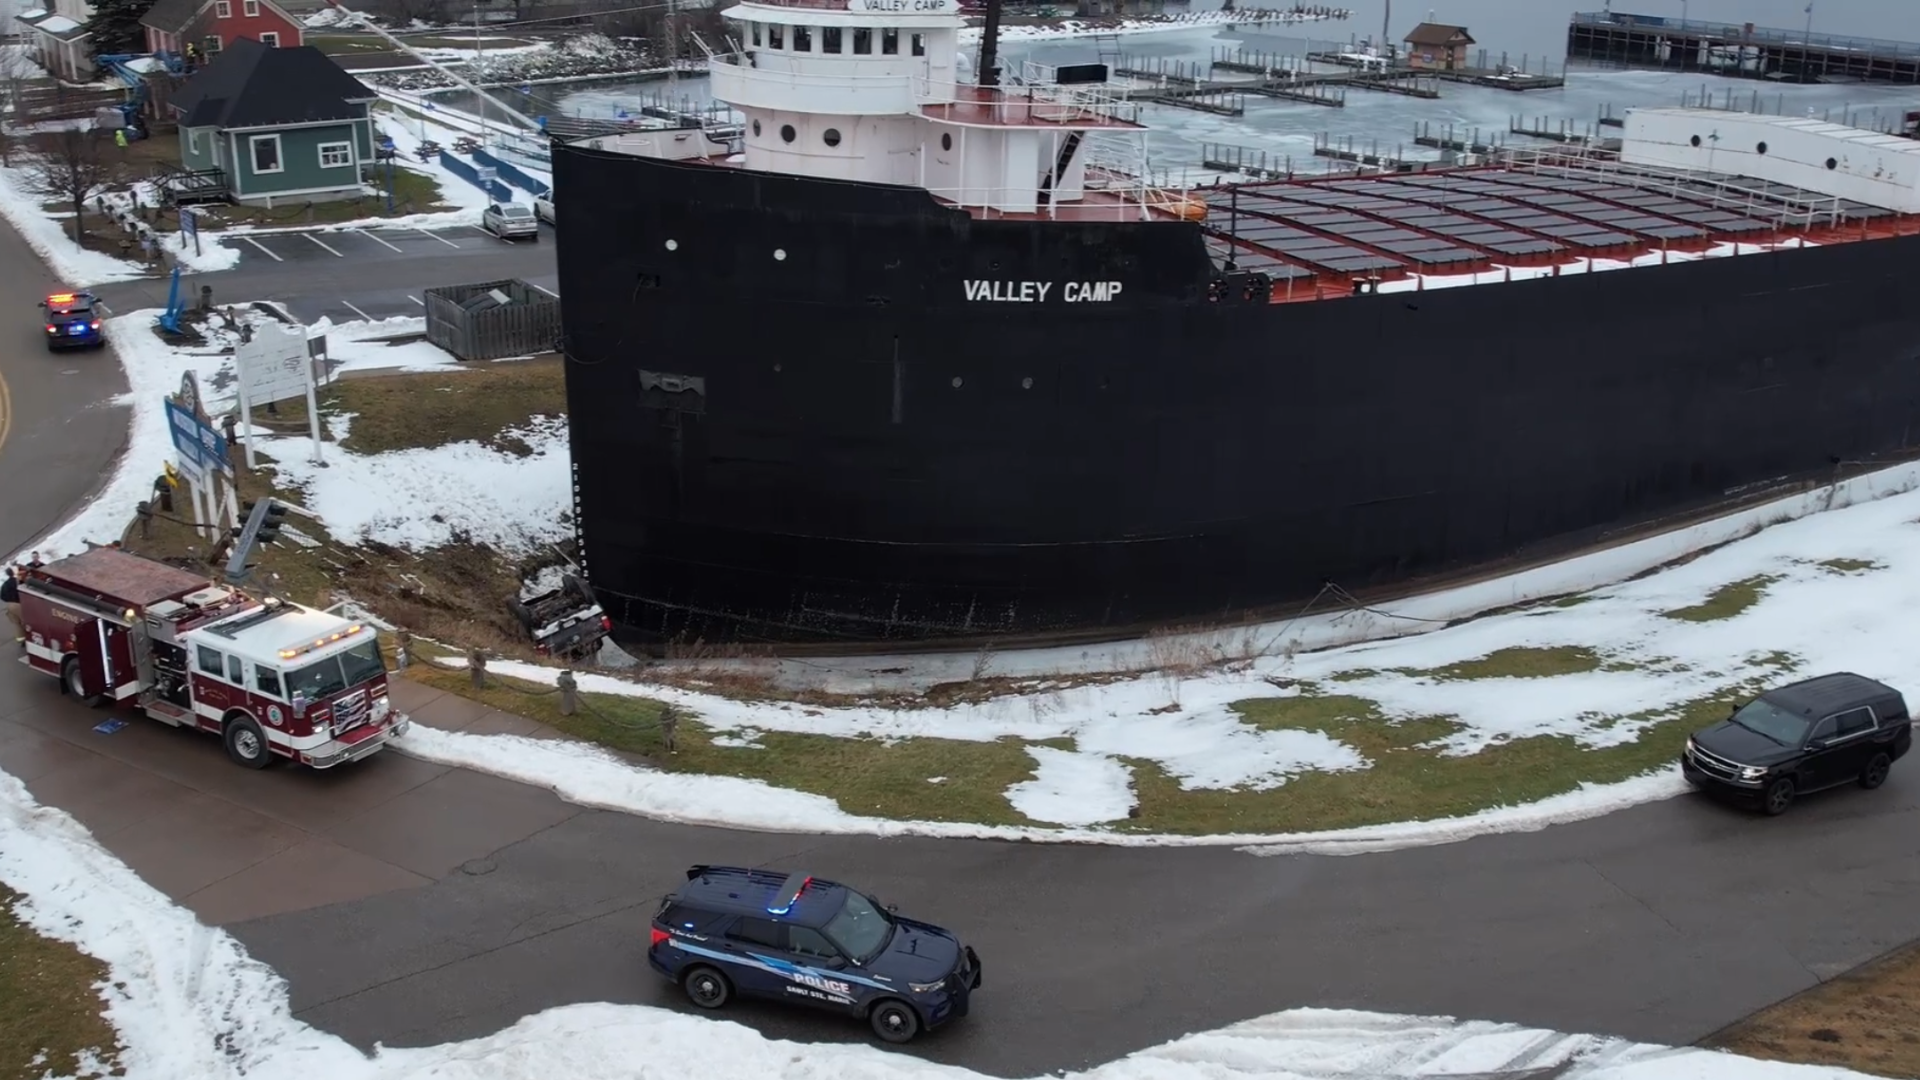 Truck crashes into historic ship in Sault Ste. Marie, driver injured